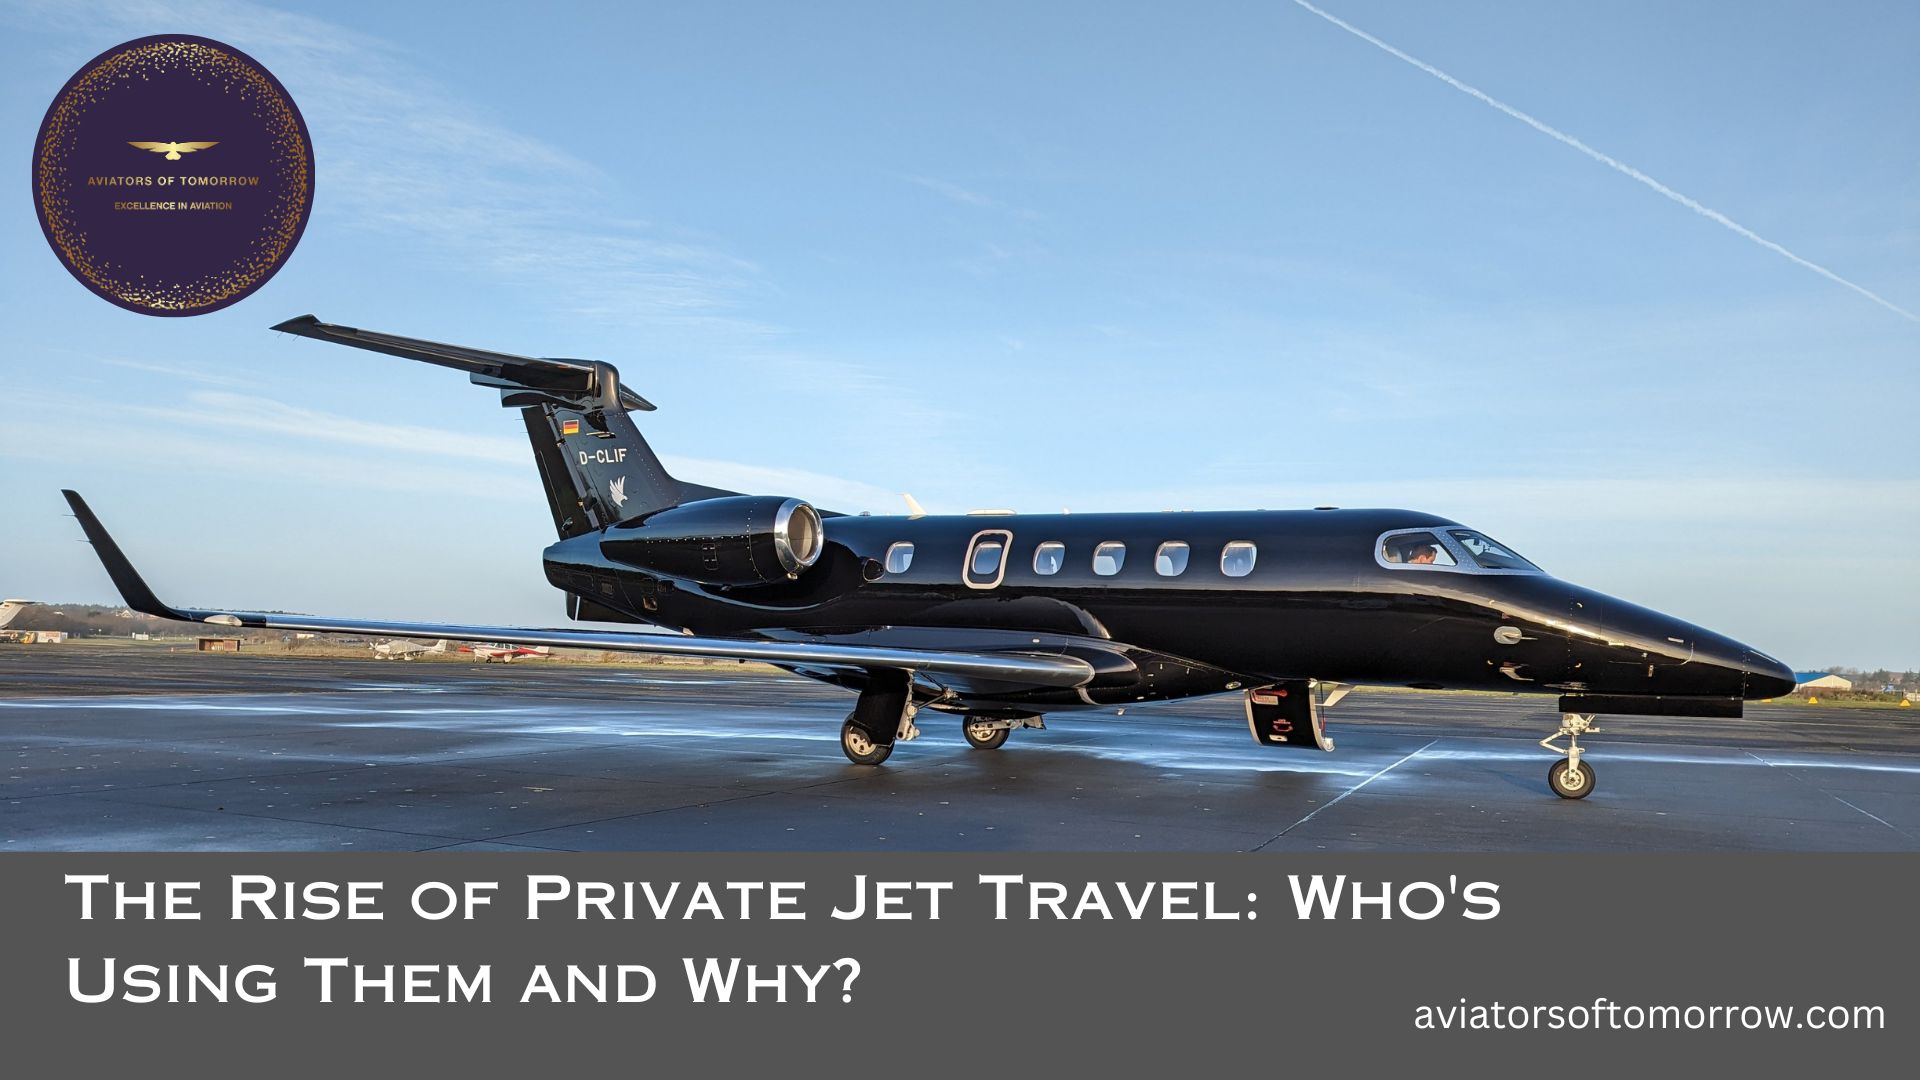 The Rise of Private Jet Travel: Who's Using Them and Why?